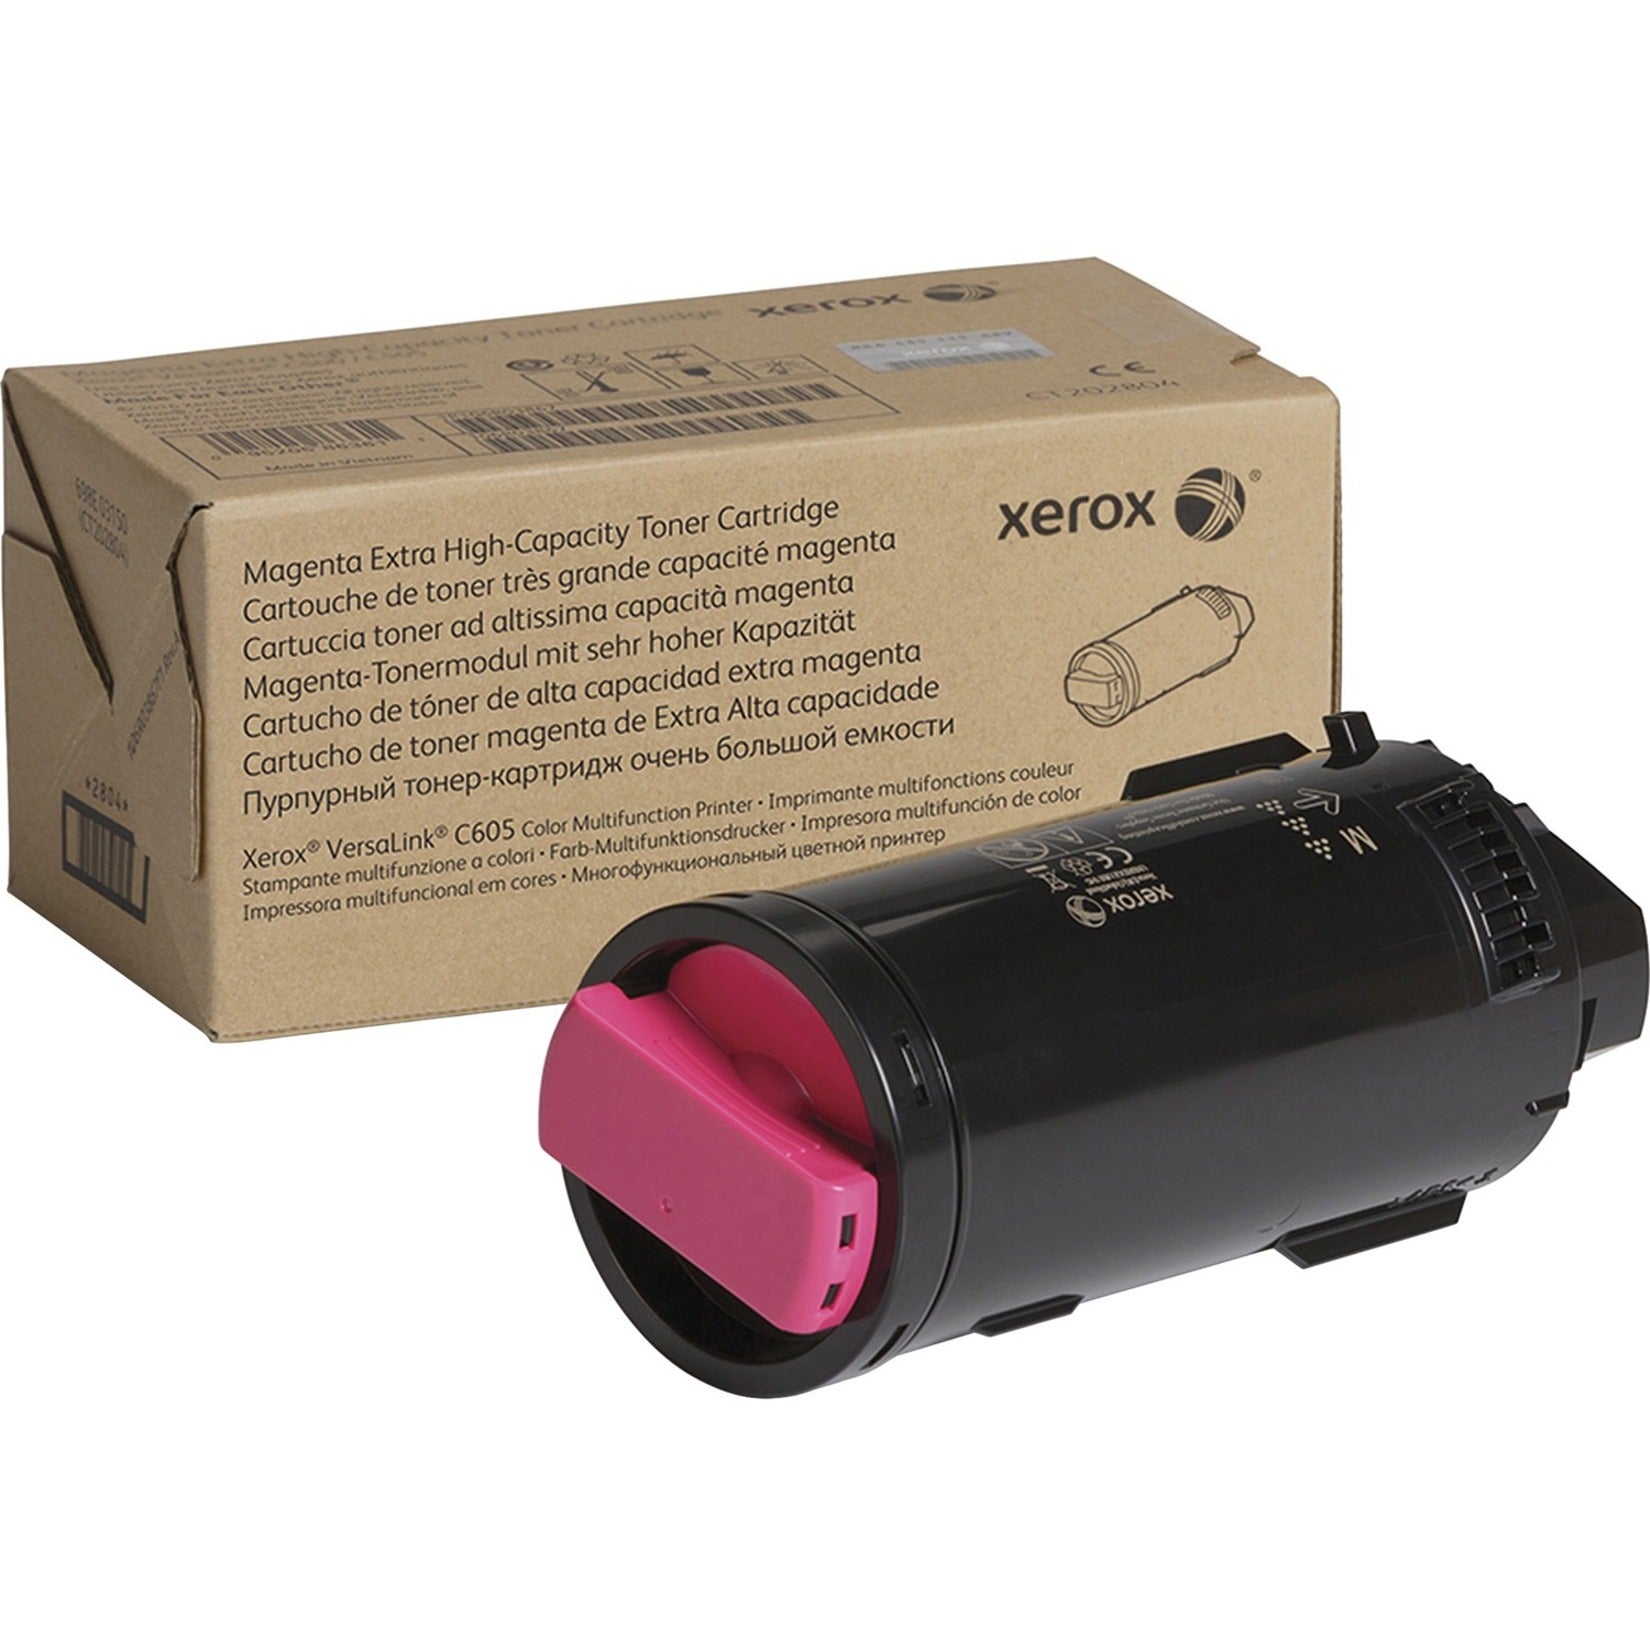 Xerox 106R04011 Toner Cartridge, Extra High Yield, Magenta, 16800 Pages